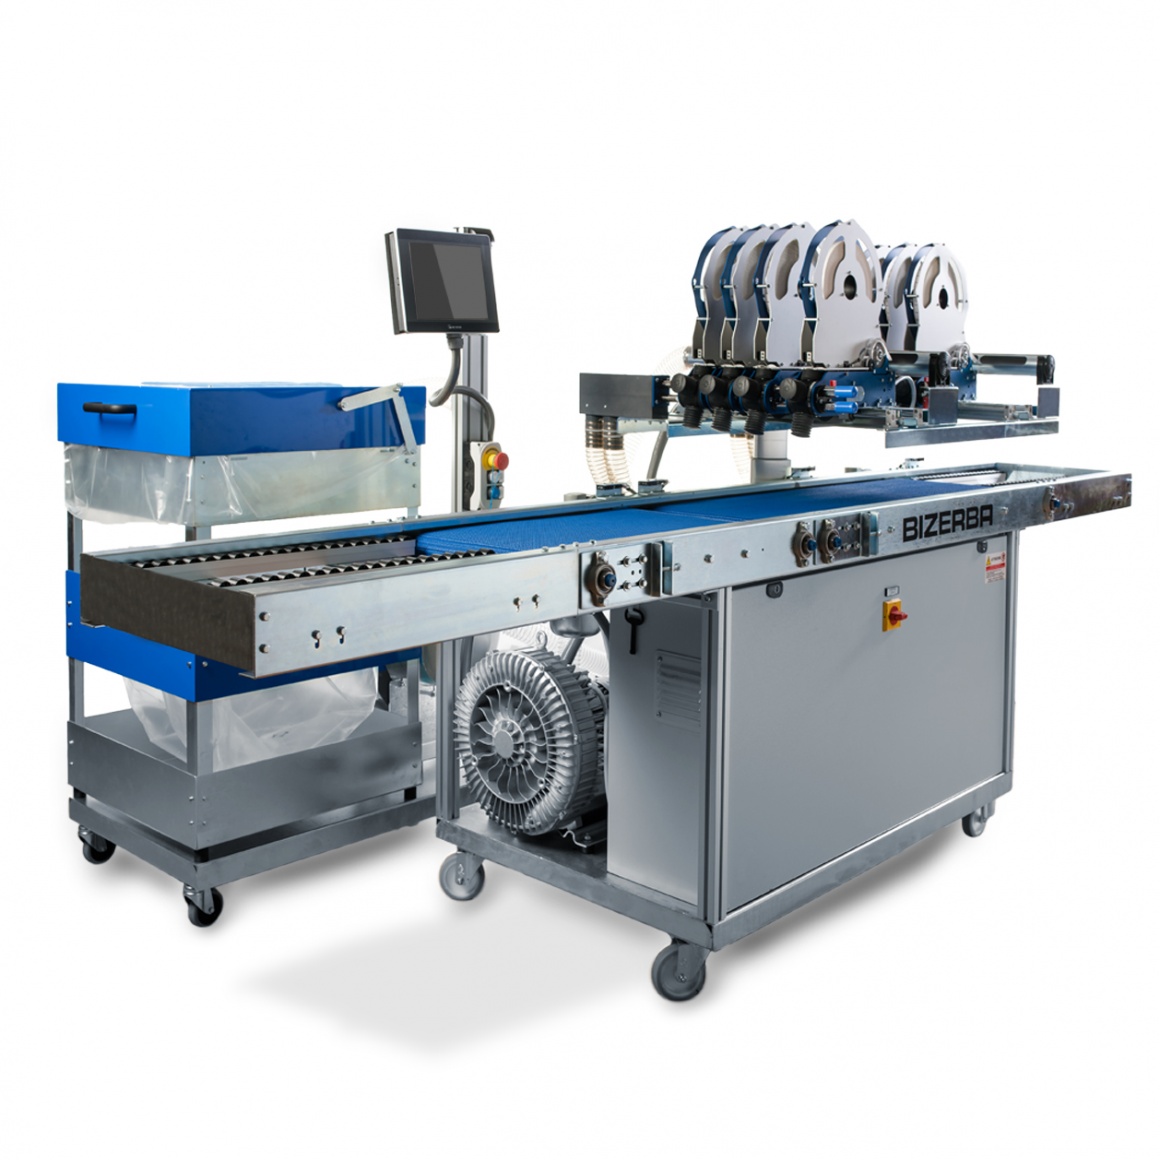 The LDI 20 labeler can be used to apply labels to loose fruit...